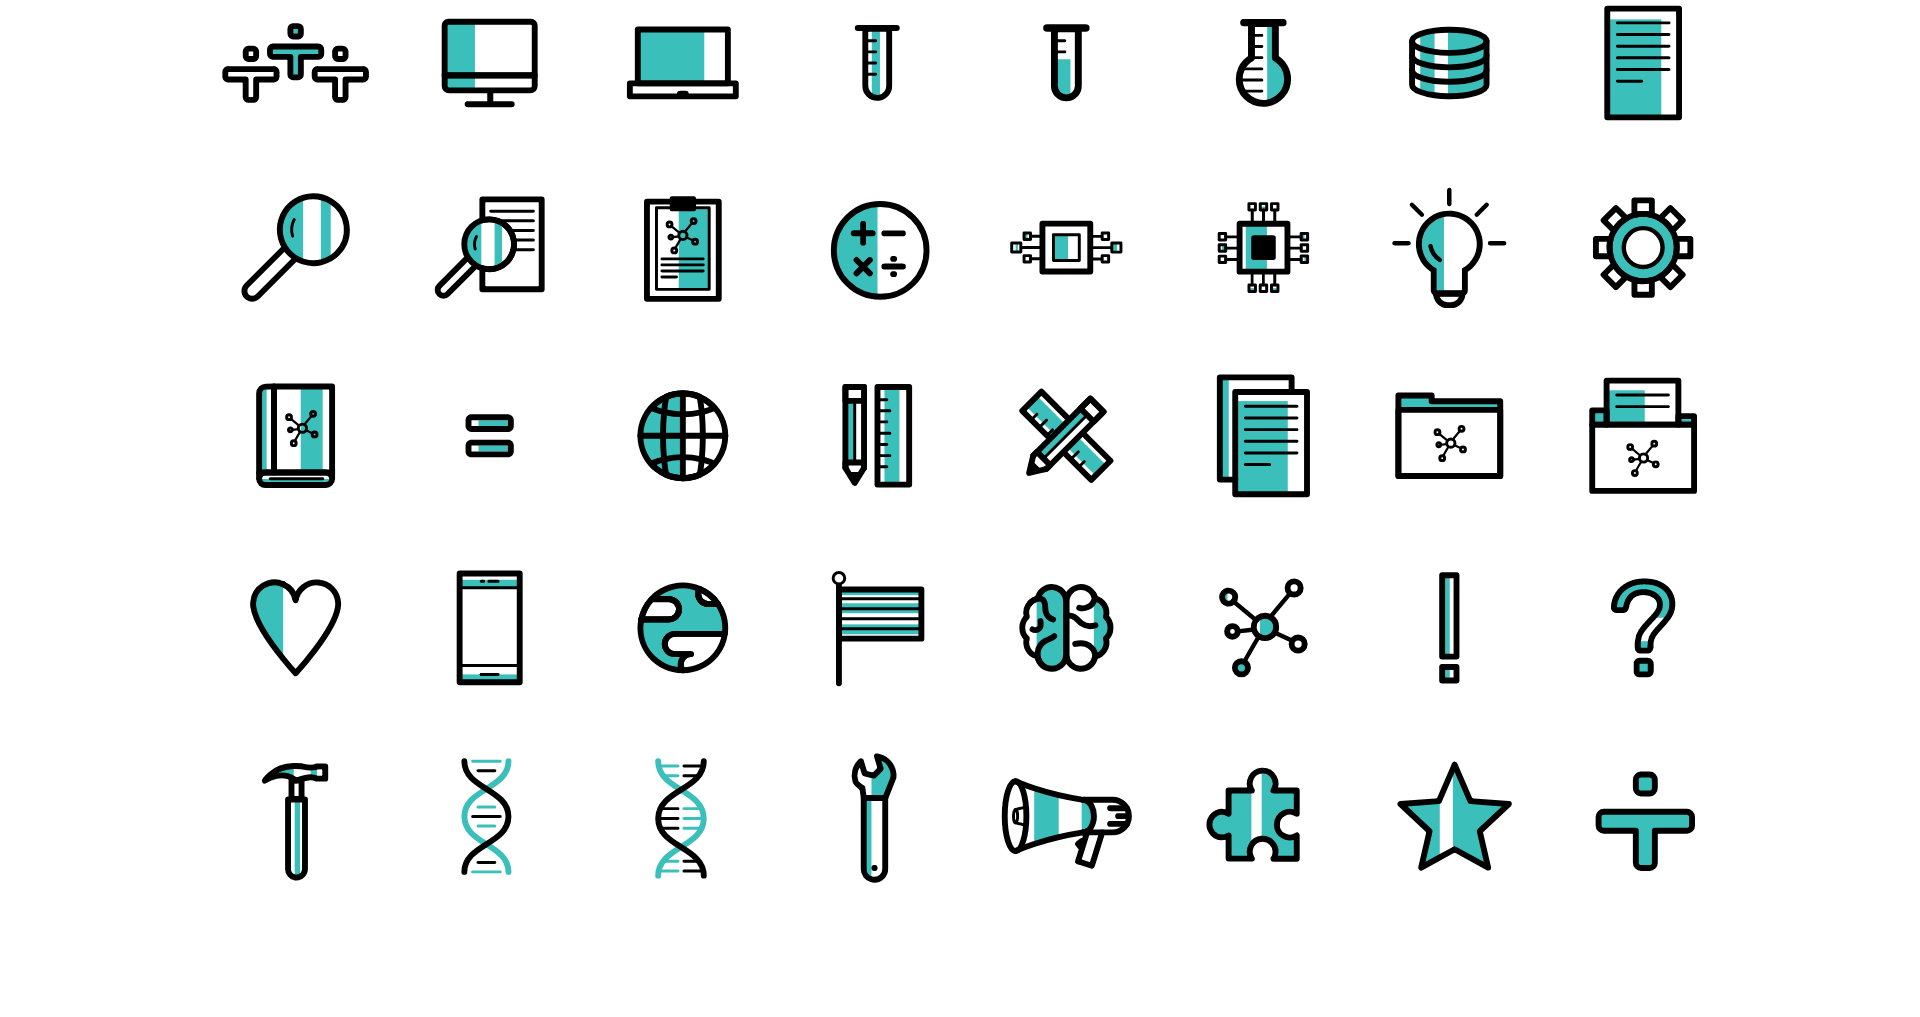 stempathy_icons_cropped